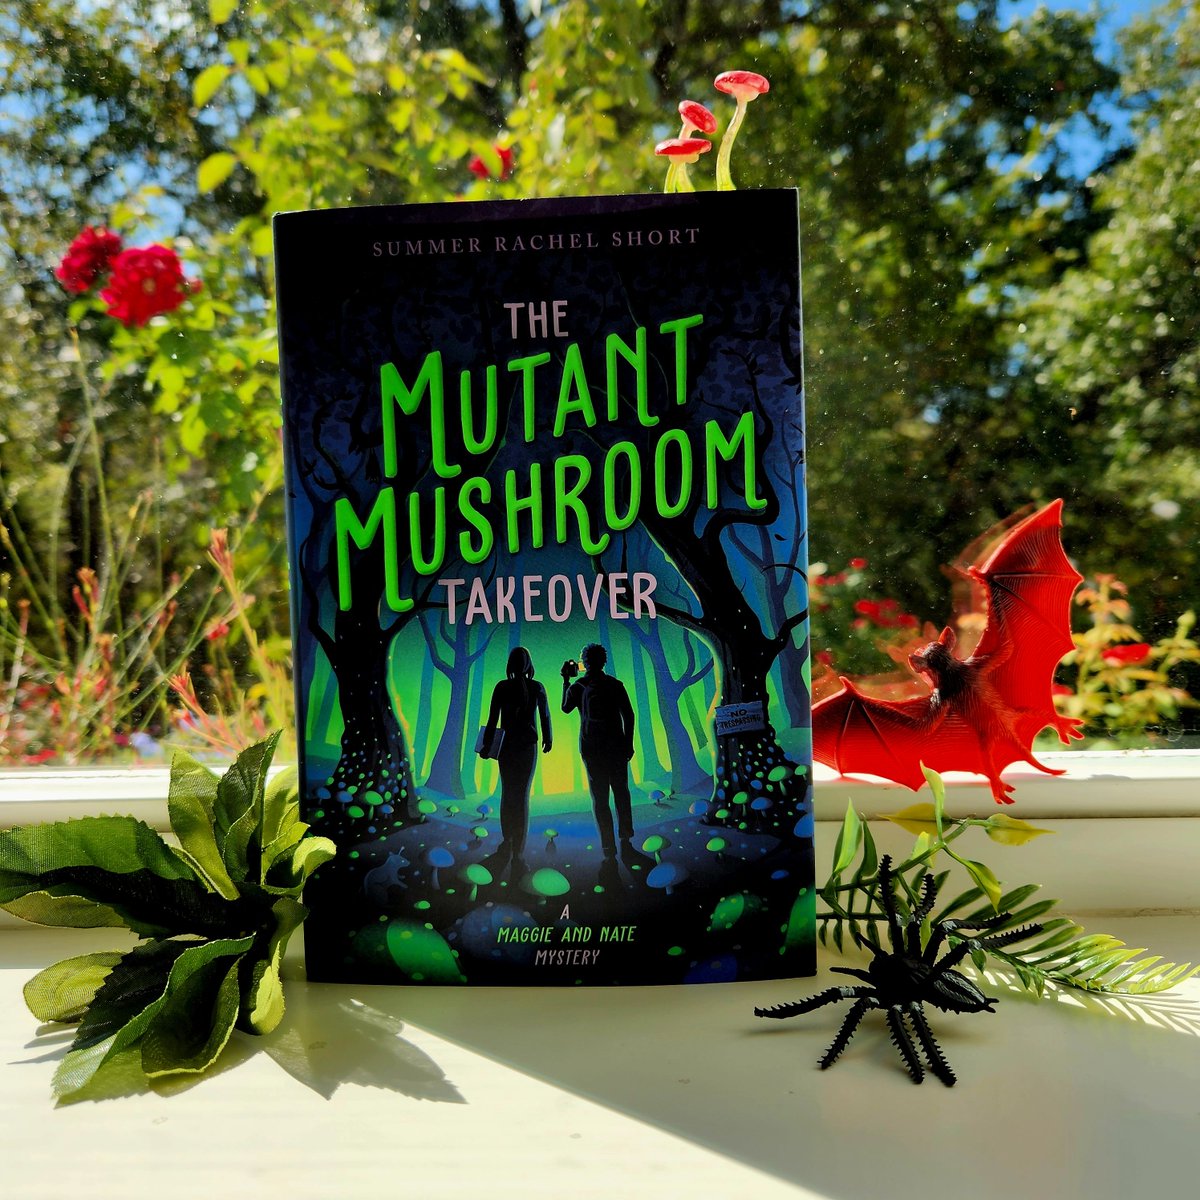 Looking for lightly spooky #kidlit 🎃? Try this! When a strange glowing fungus spreads through a small town, the only ones who can solve the mystery are a science-loving girl and her youtuber best friend. Real science meets zombie fun. 🍄🧟‍♂️ #middlegradebooks #spookyseason #STEM